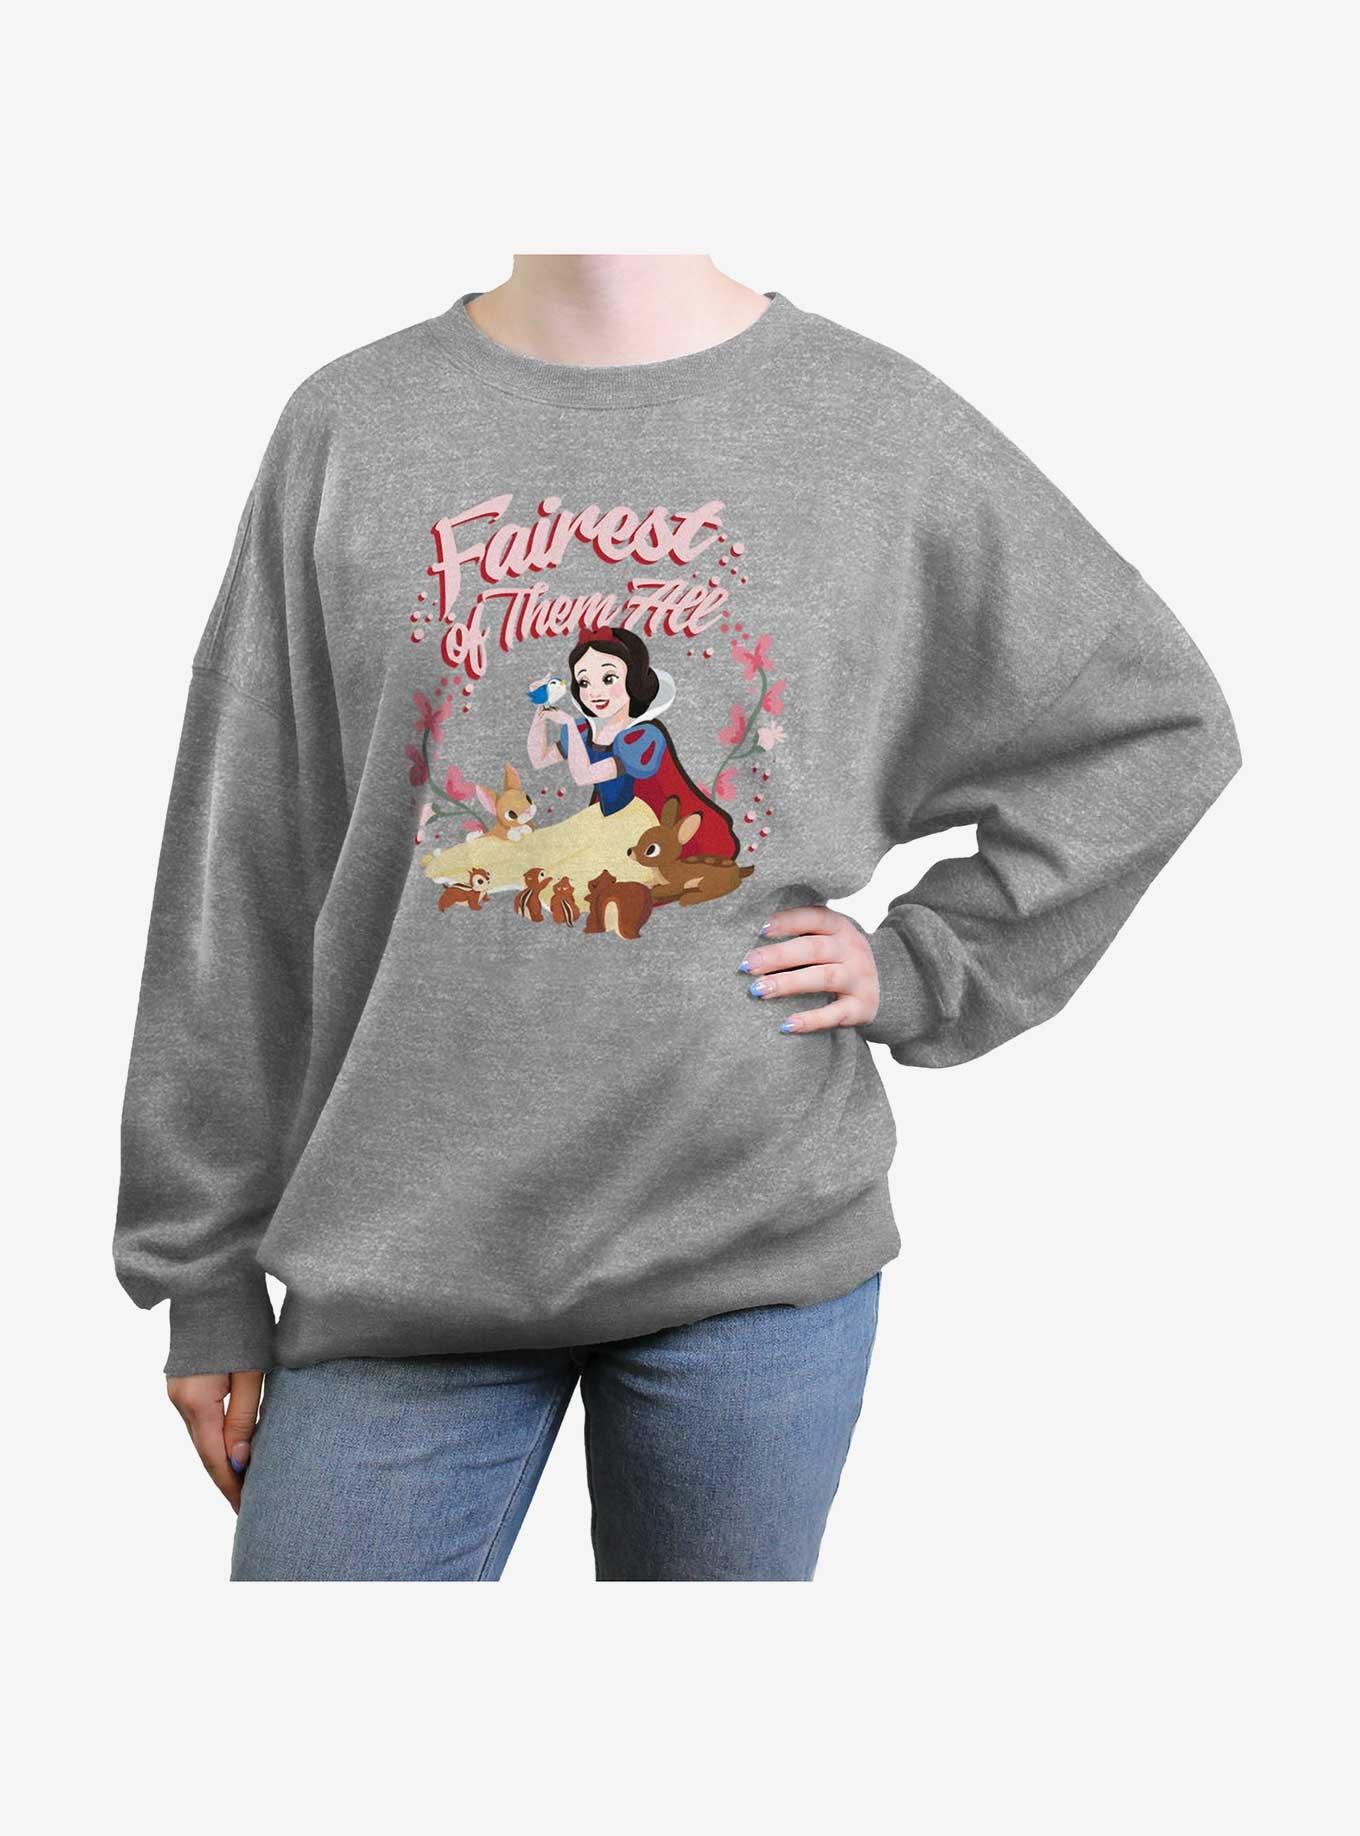 Disney Snow White and the Seven Dwarfs Fairest Of Them All Womens Oversized Sweatshirt, , hi-res